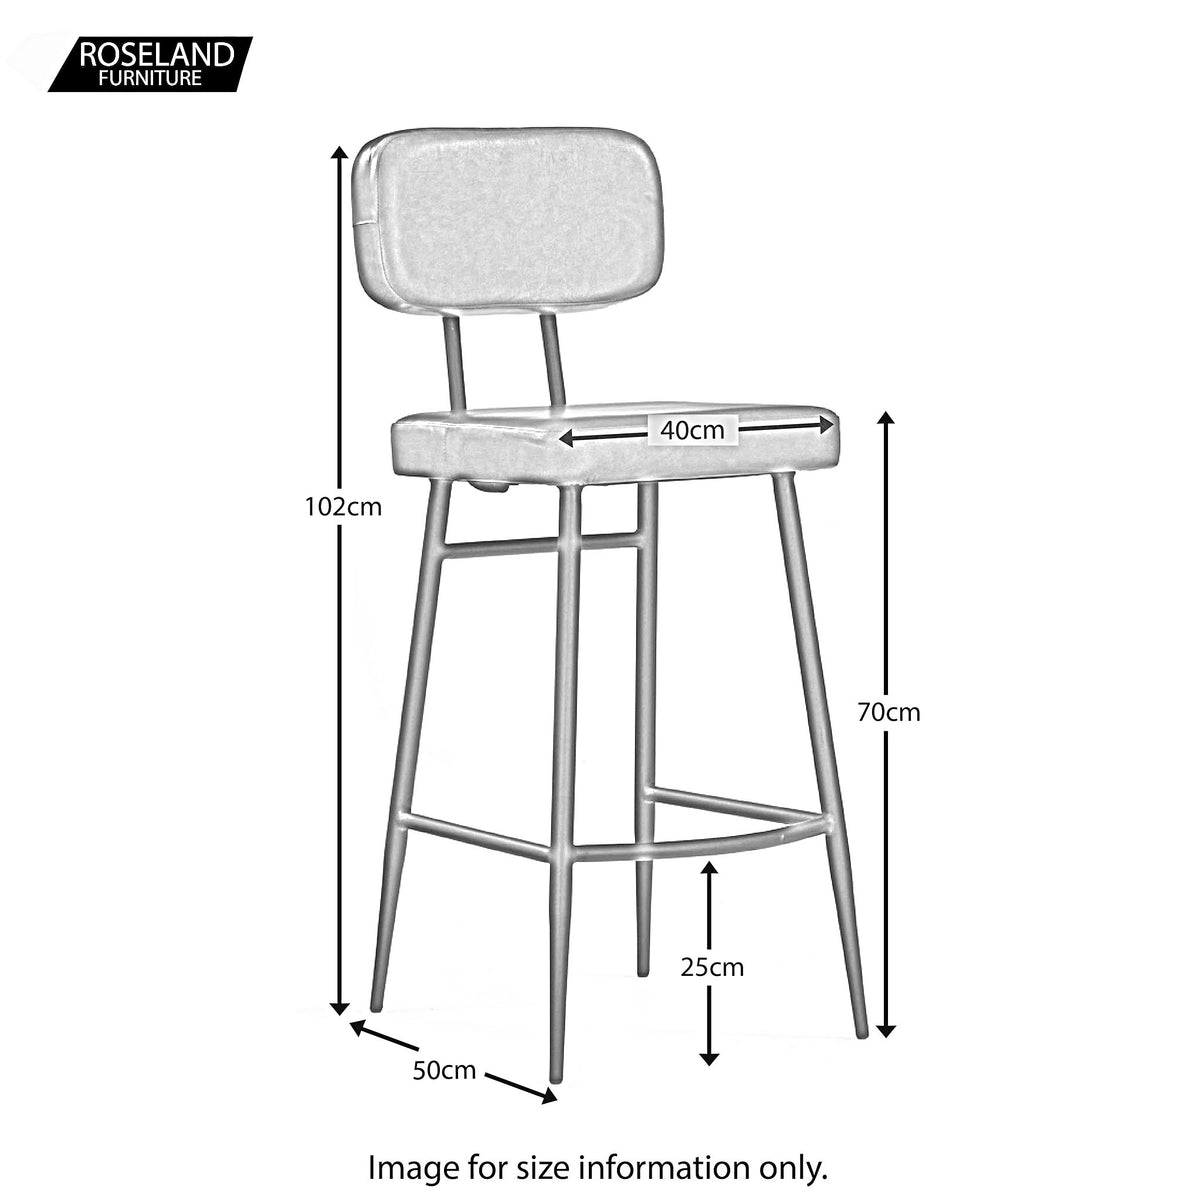 Hulta Brown Leather Stool - Size Guide